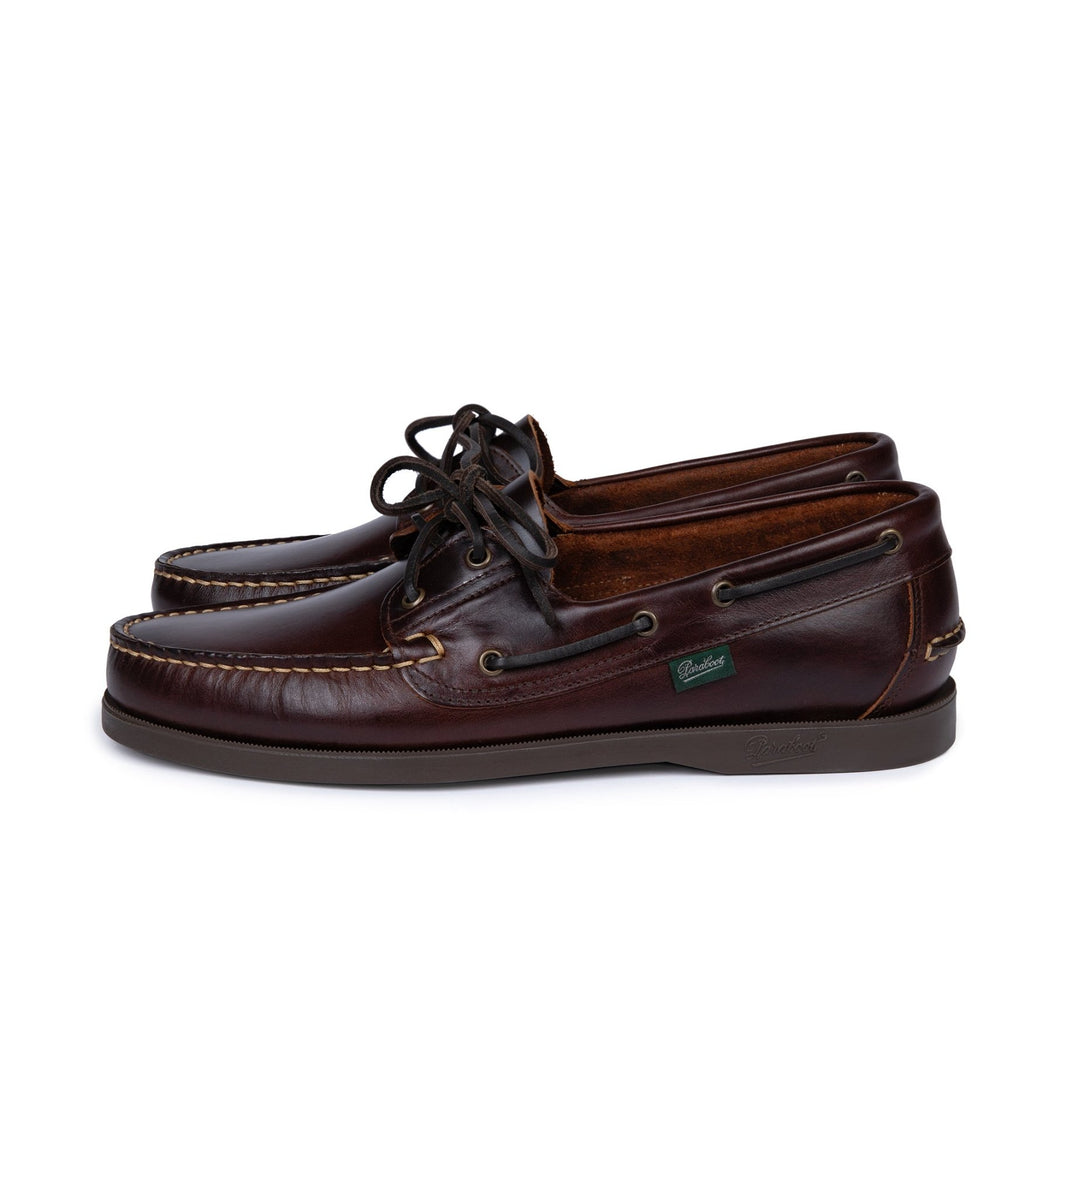 Paraboot Barth boat shoes - Neutrals